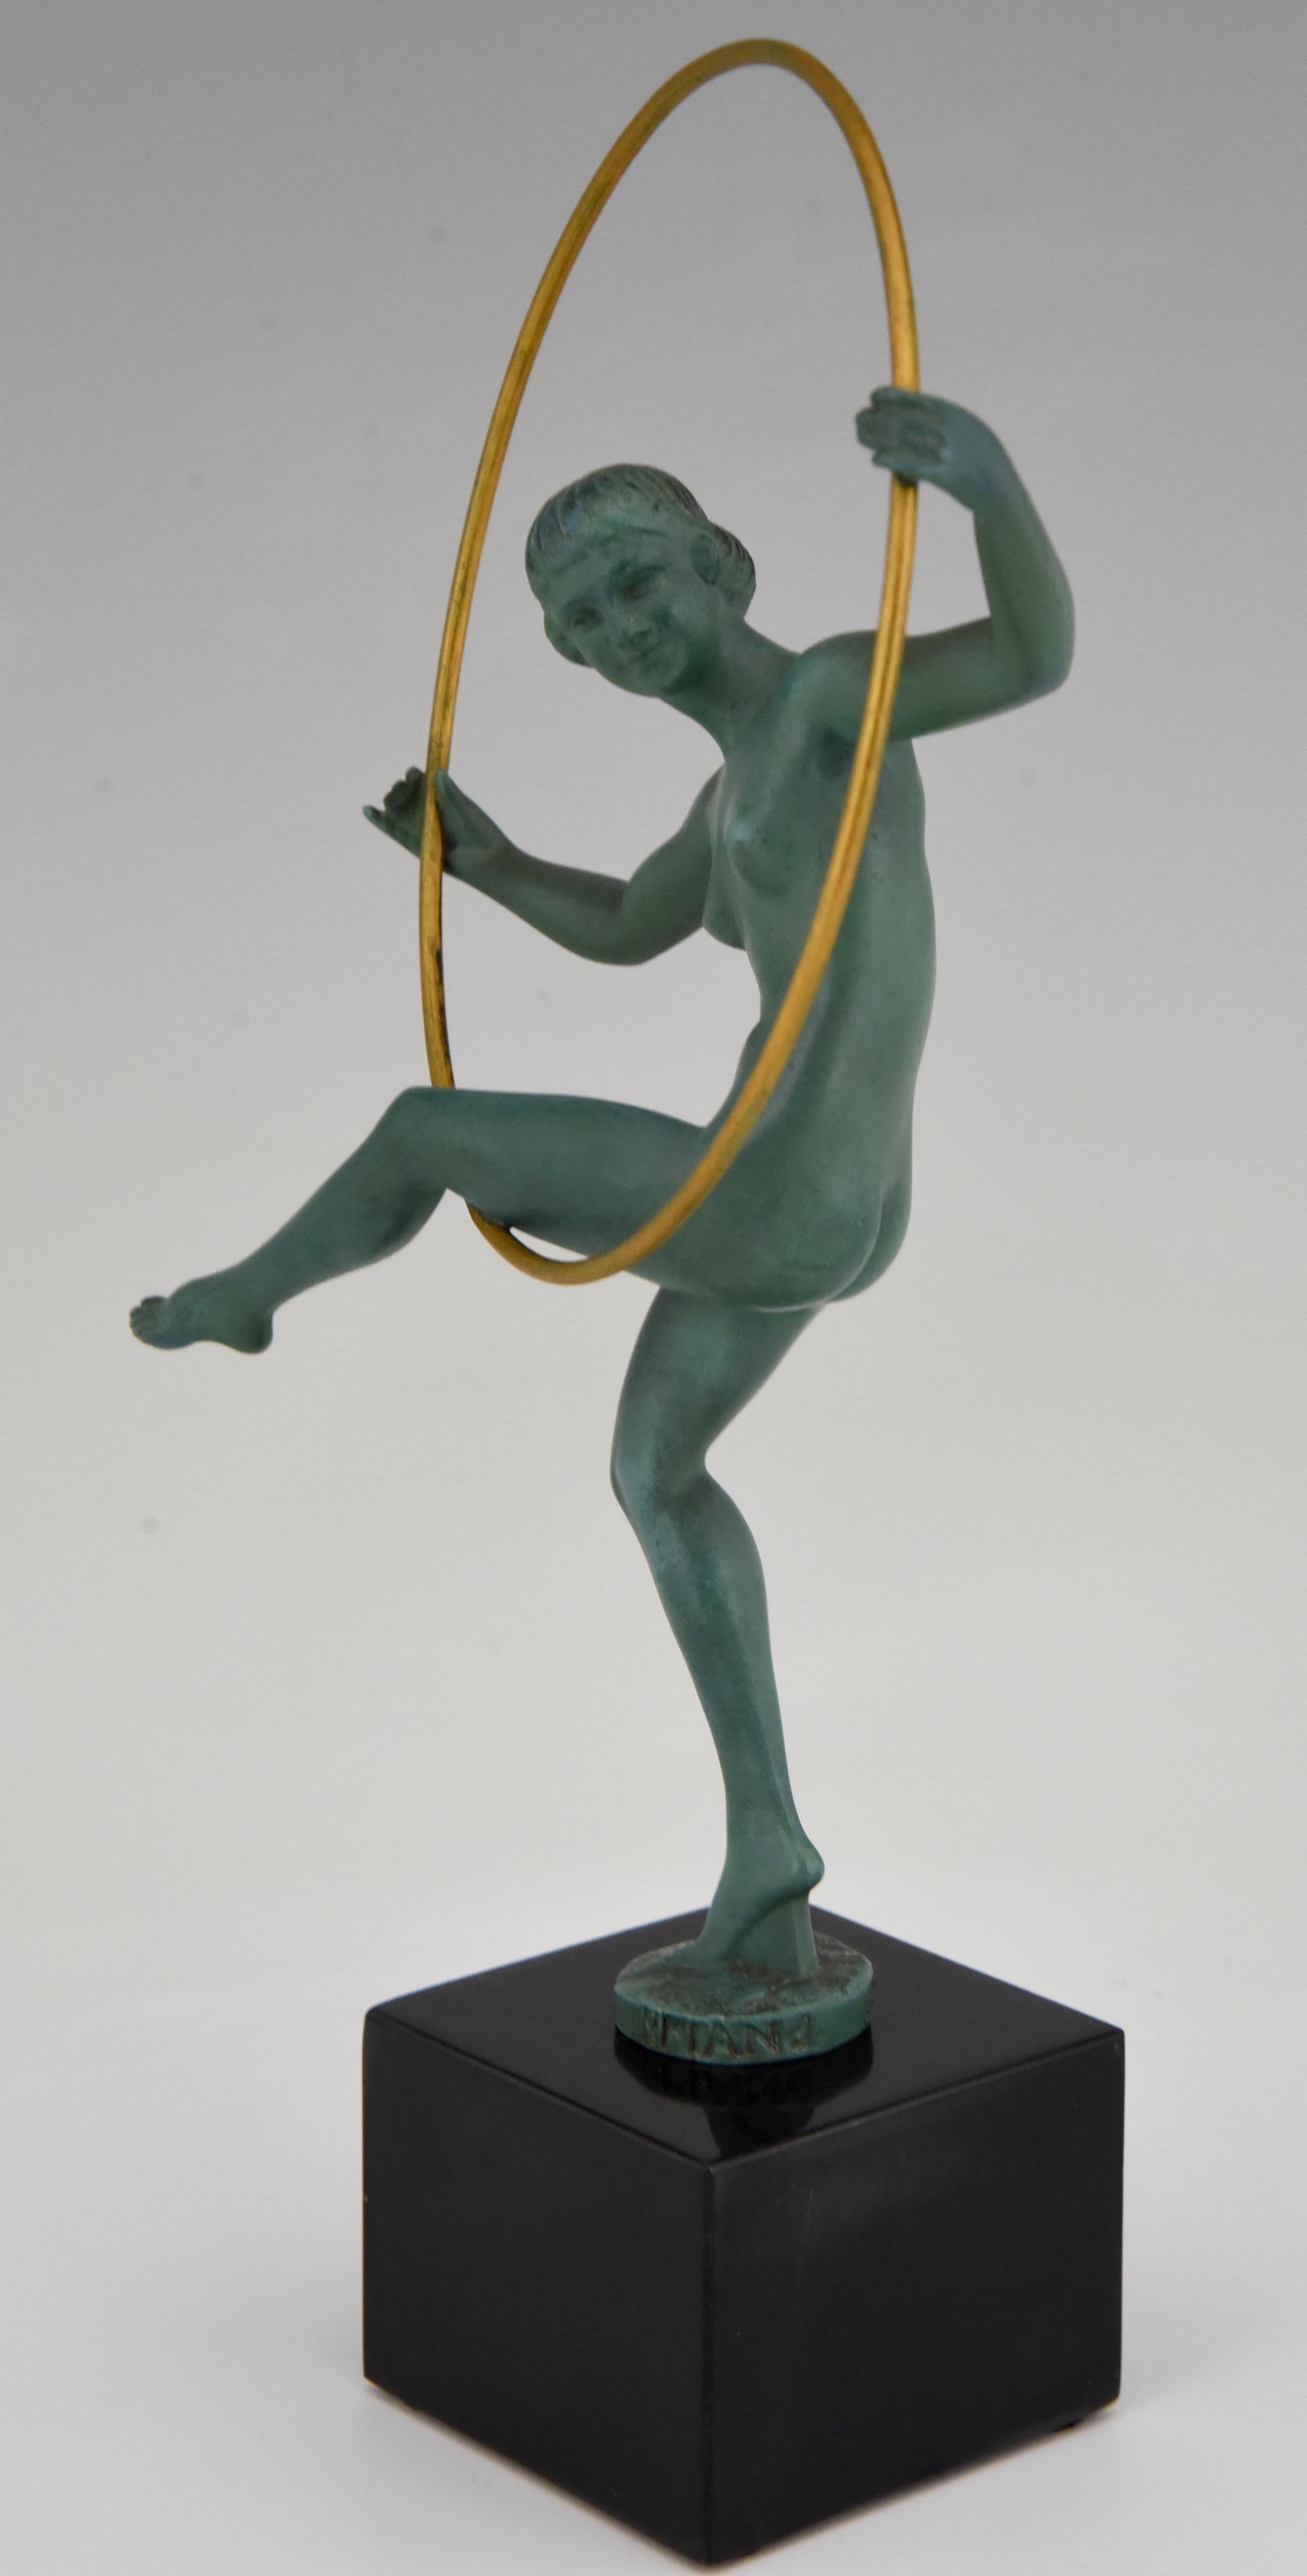 French Art Deco Sculpture Hoop Dancer Briand, Marcel Andre Bouraine France, 1930